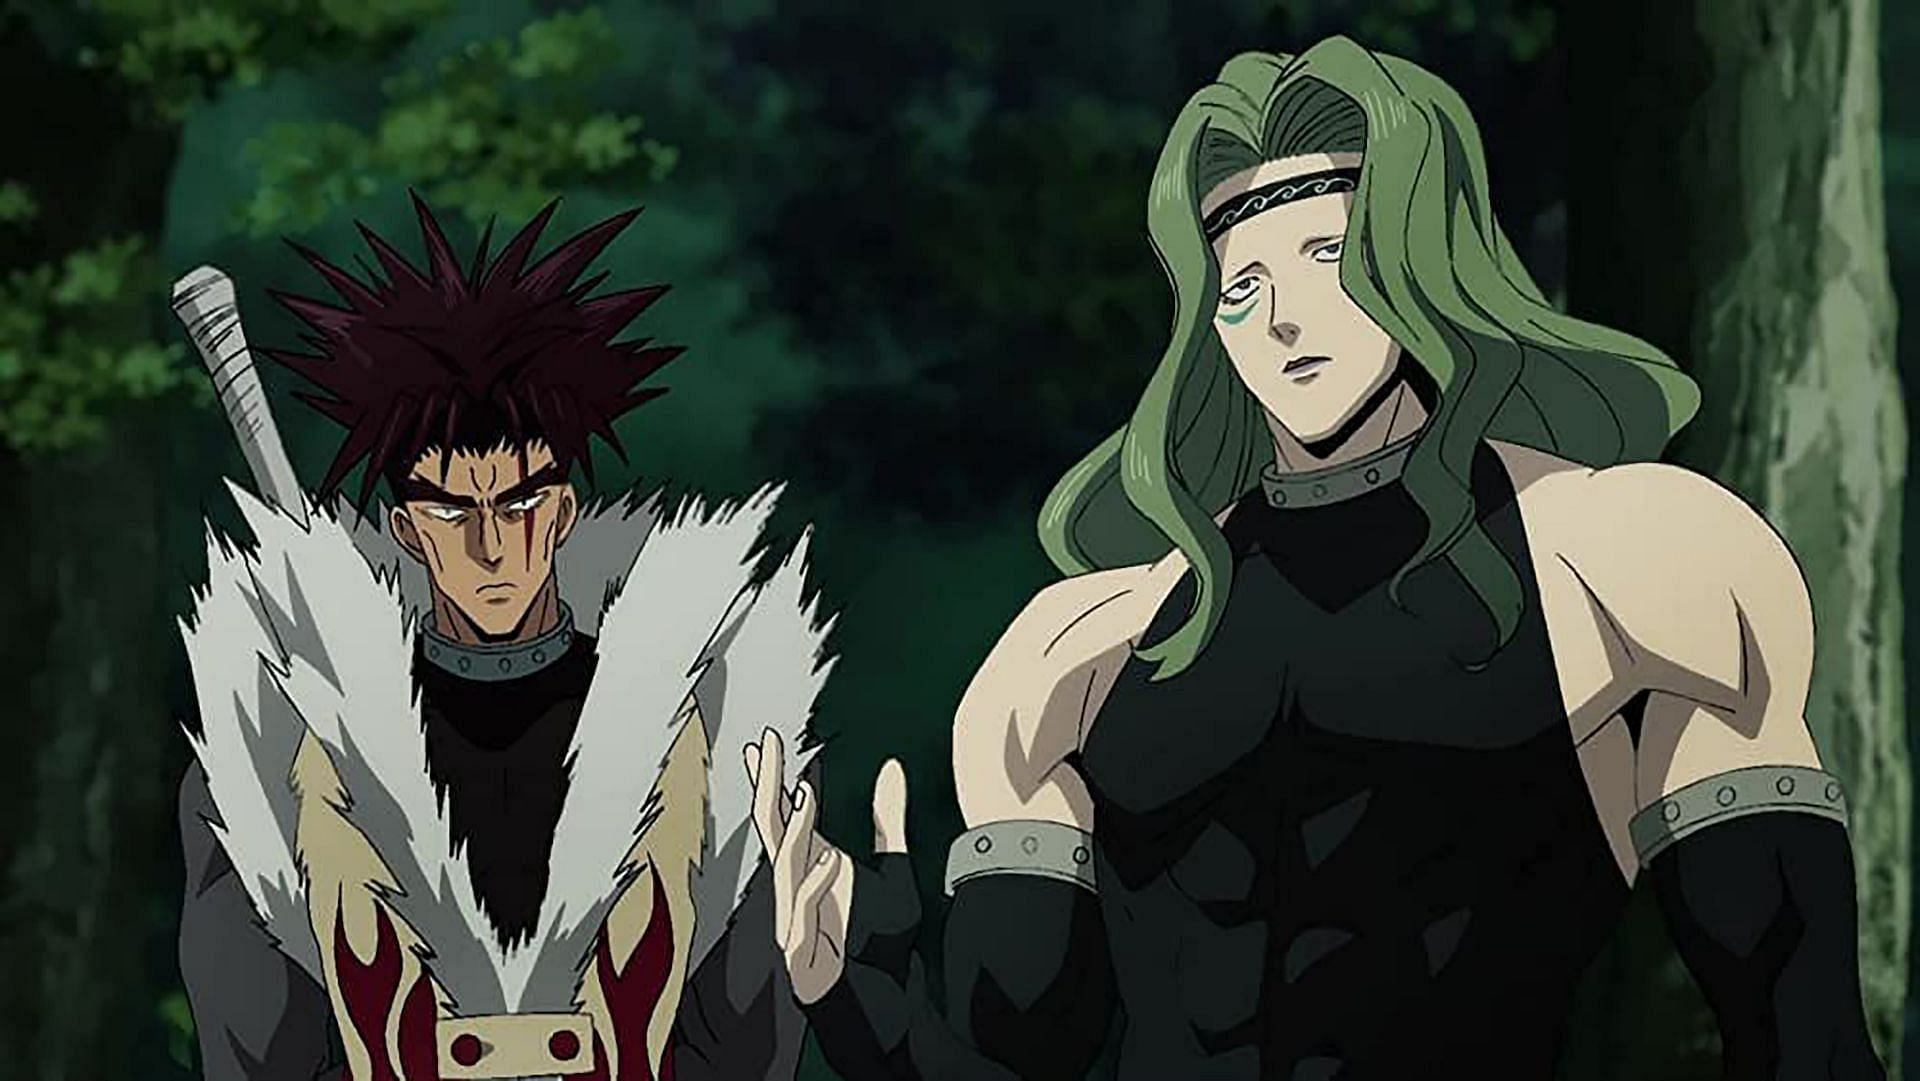 Hellfire Flame (left) from the One Punch Man series (image via Netflix)